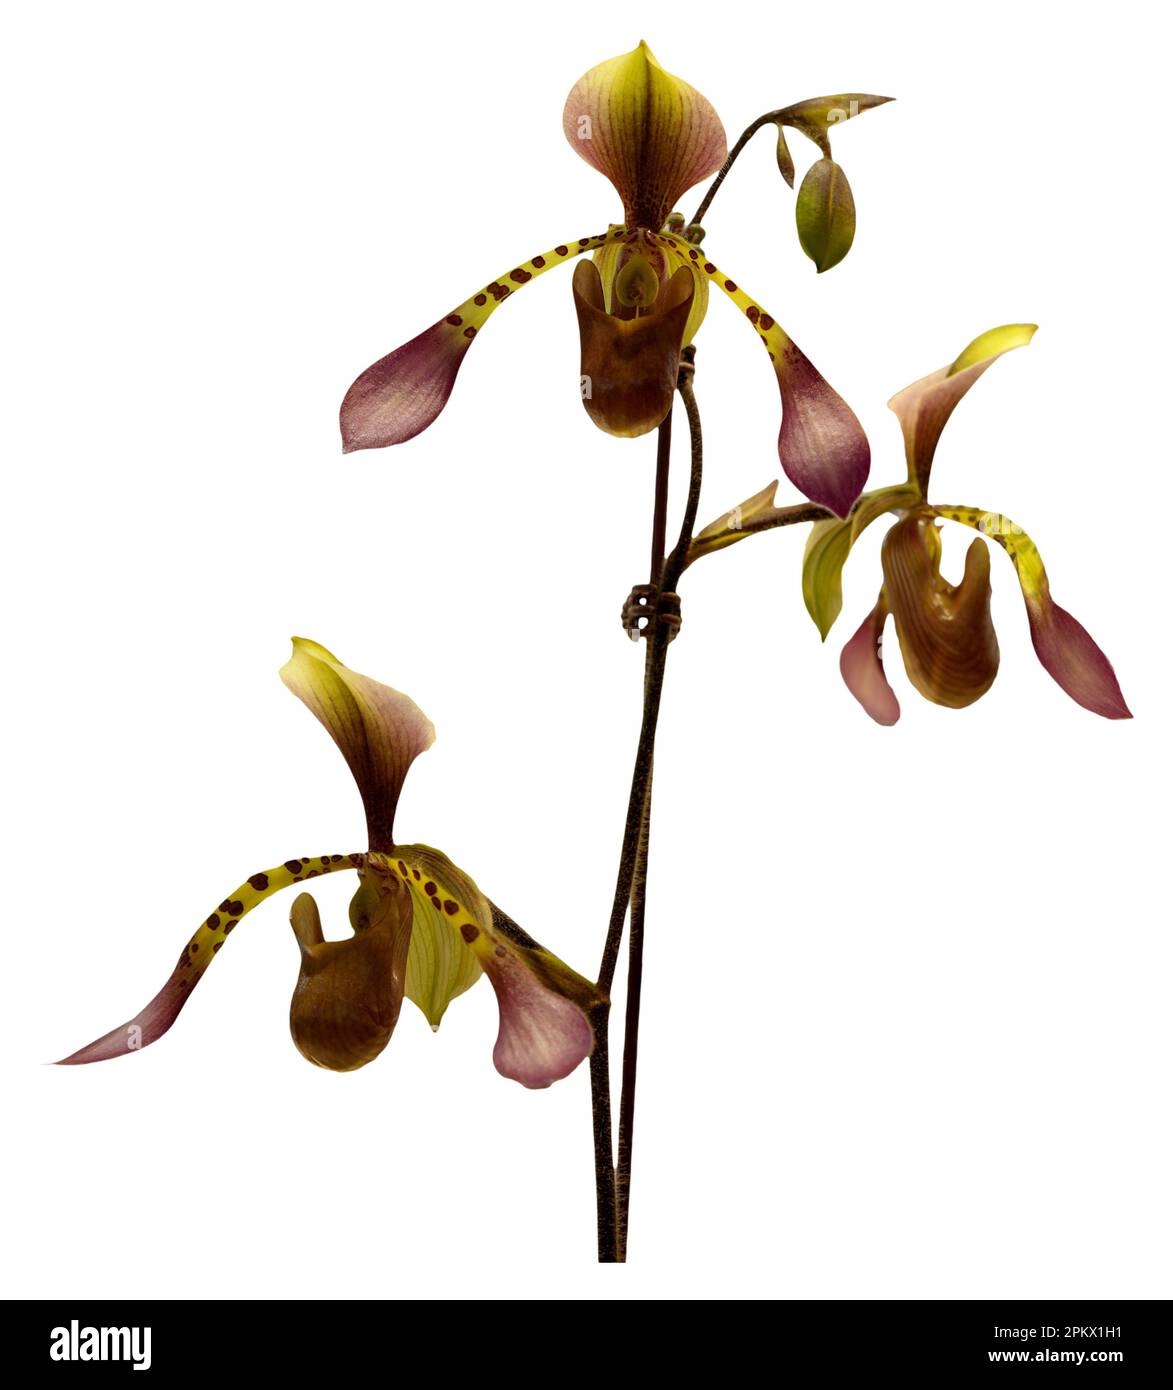 Flower colors are brown, yellow and pink. An orchid of the genus Paphiopedilum. Close-up of isolated beautiful plant. Stock Photo